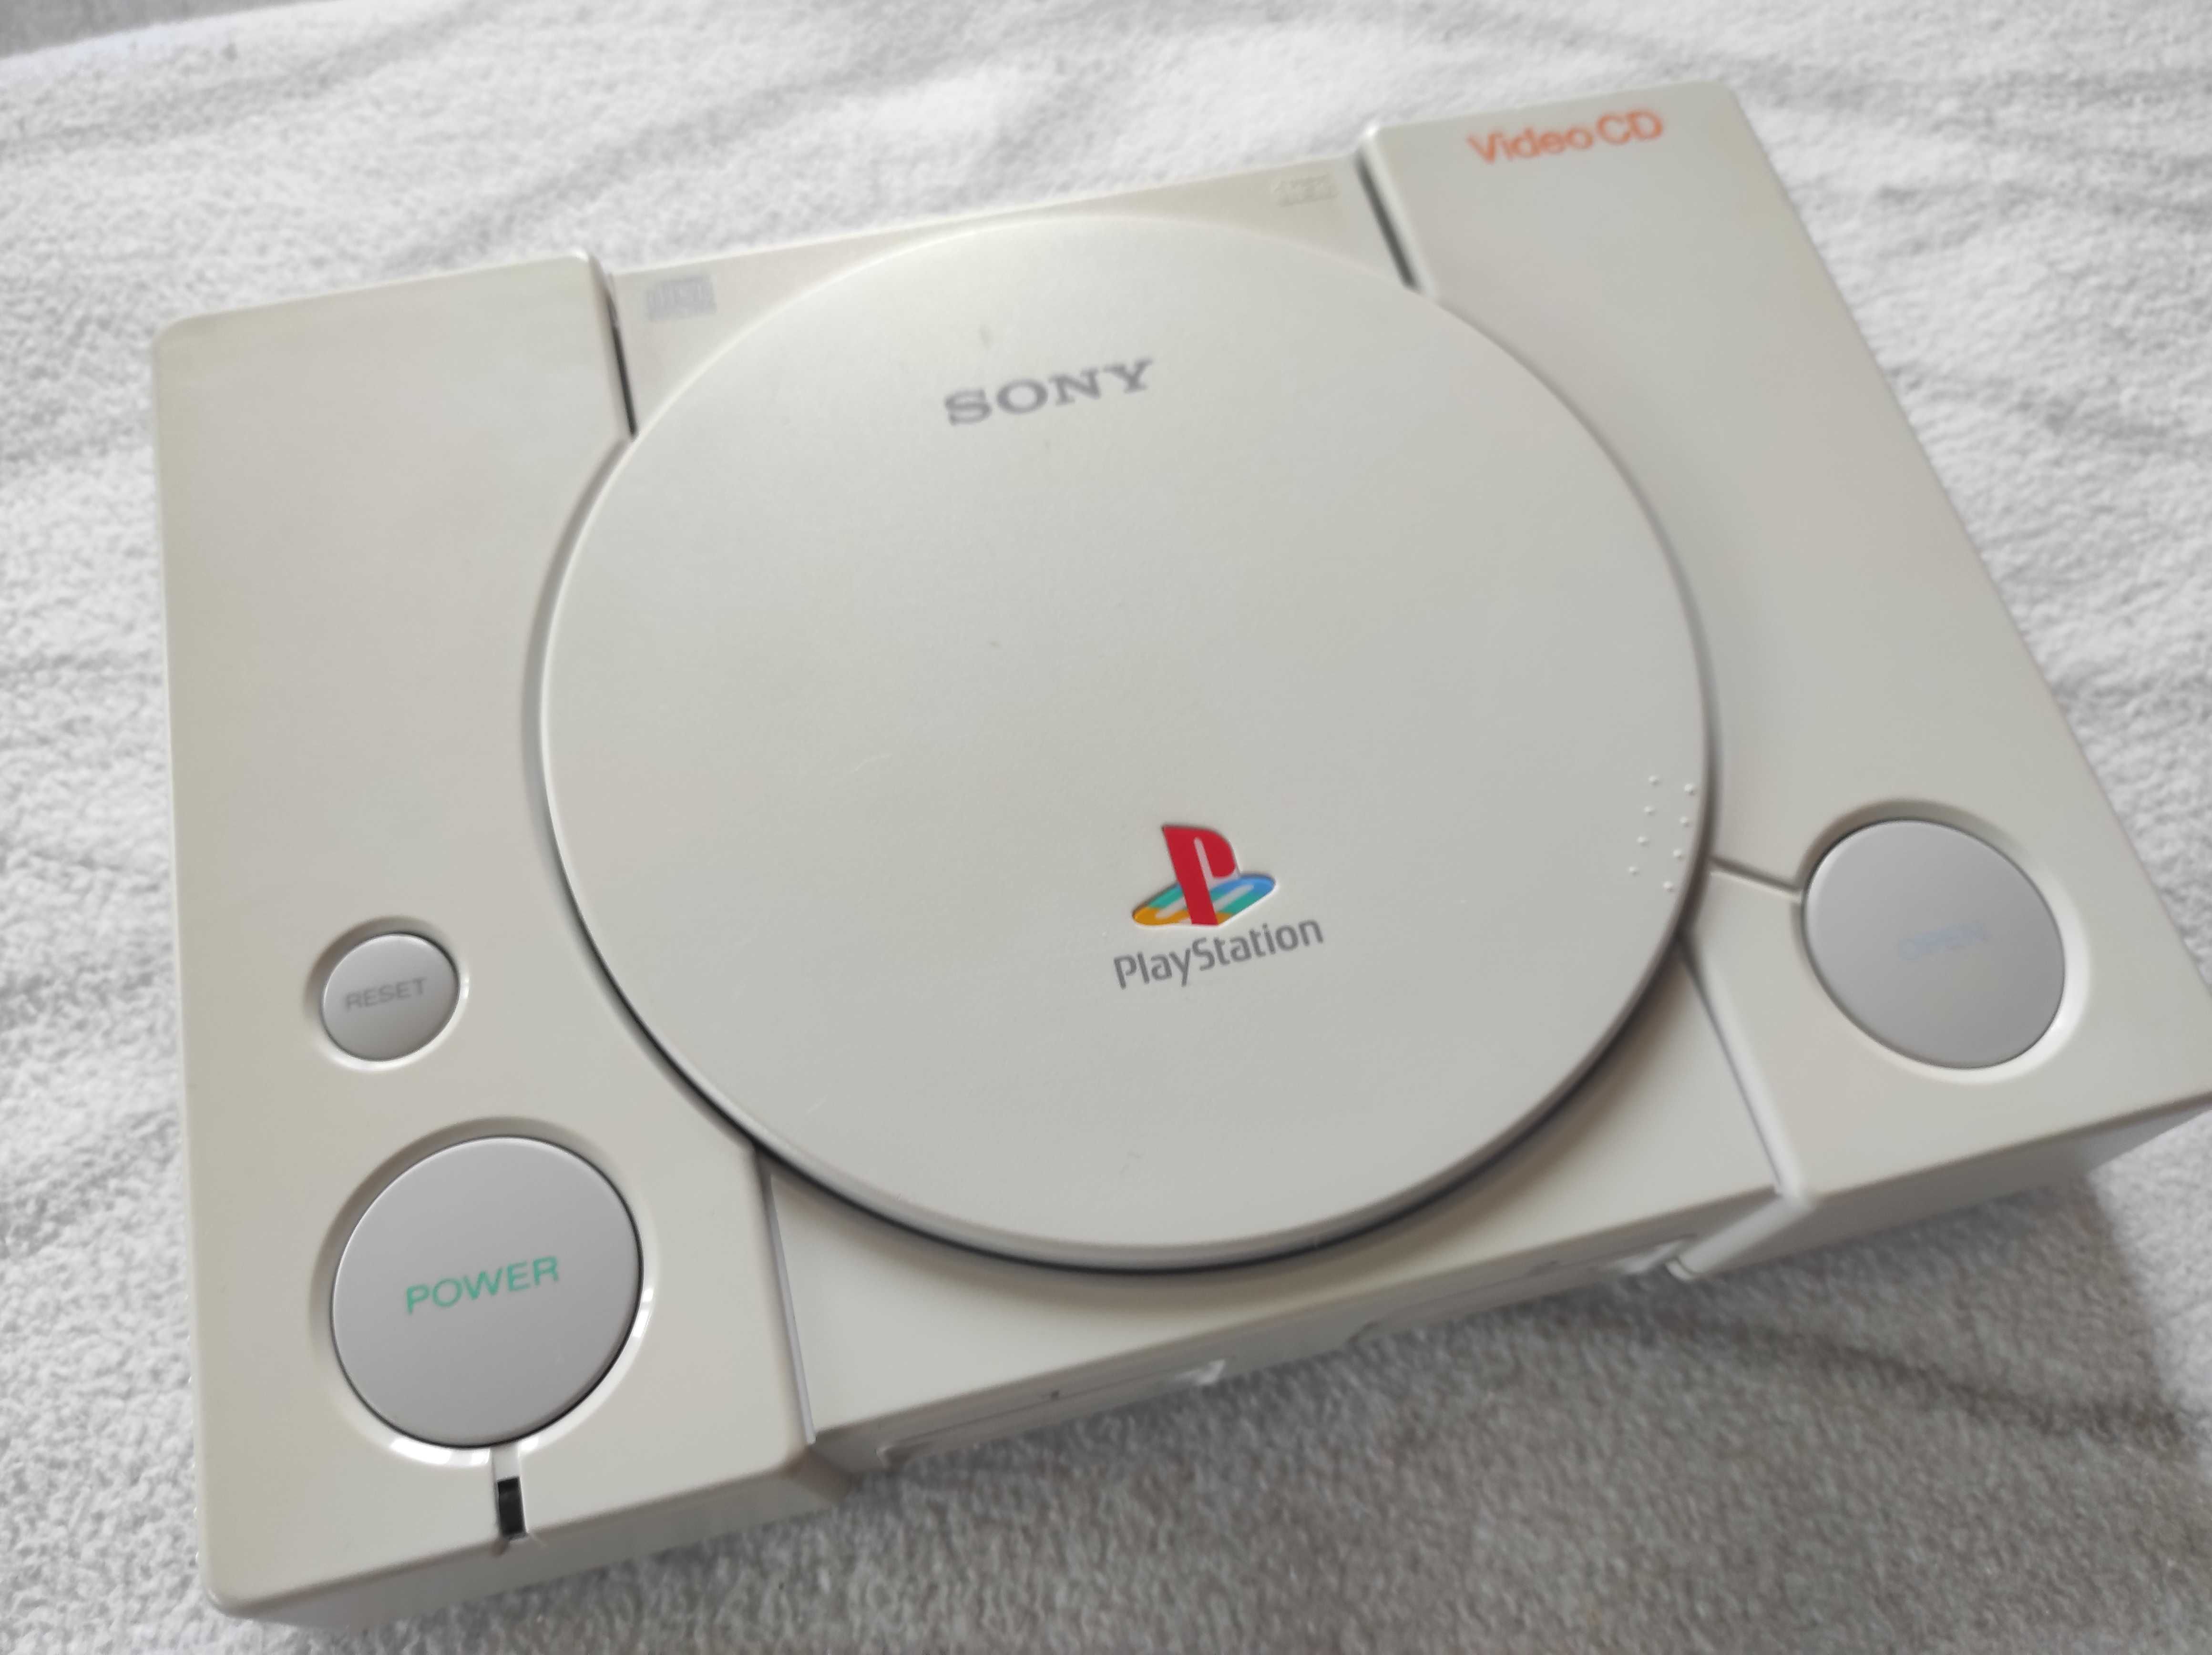 Sony Playstation VCD (SCPH-5903)